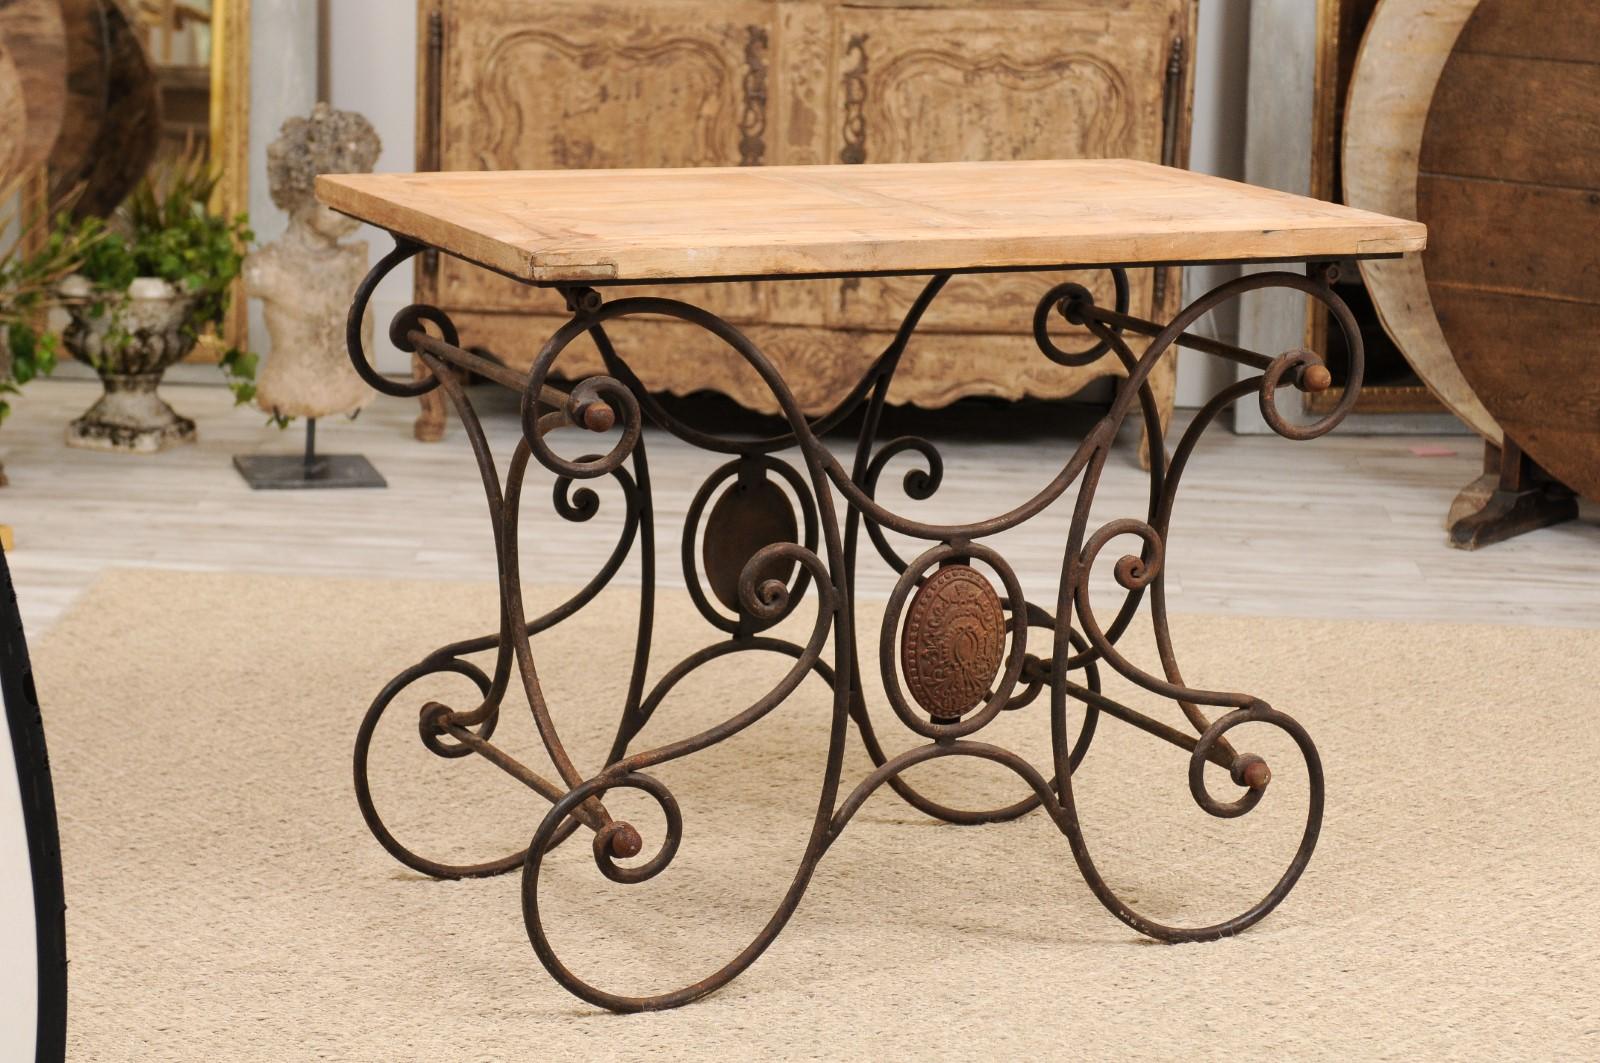 A French butcher's table with scrolled iron base, medallions and rectangular wooden top from the late 19th century. We love a gorgeous butcher’s table, and this one certainly doesn’t disappoint! We were first drawn to the sturdy and stately wood